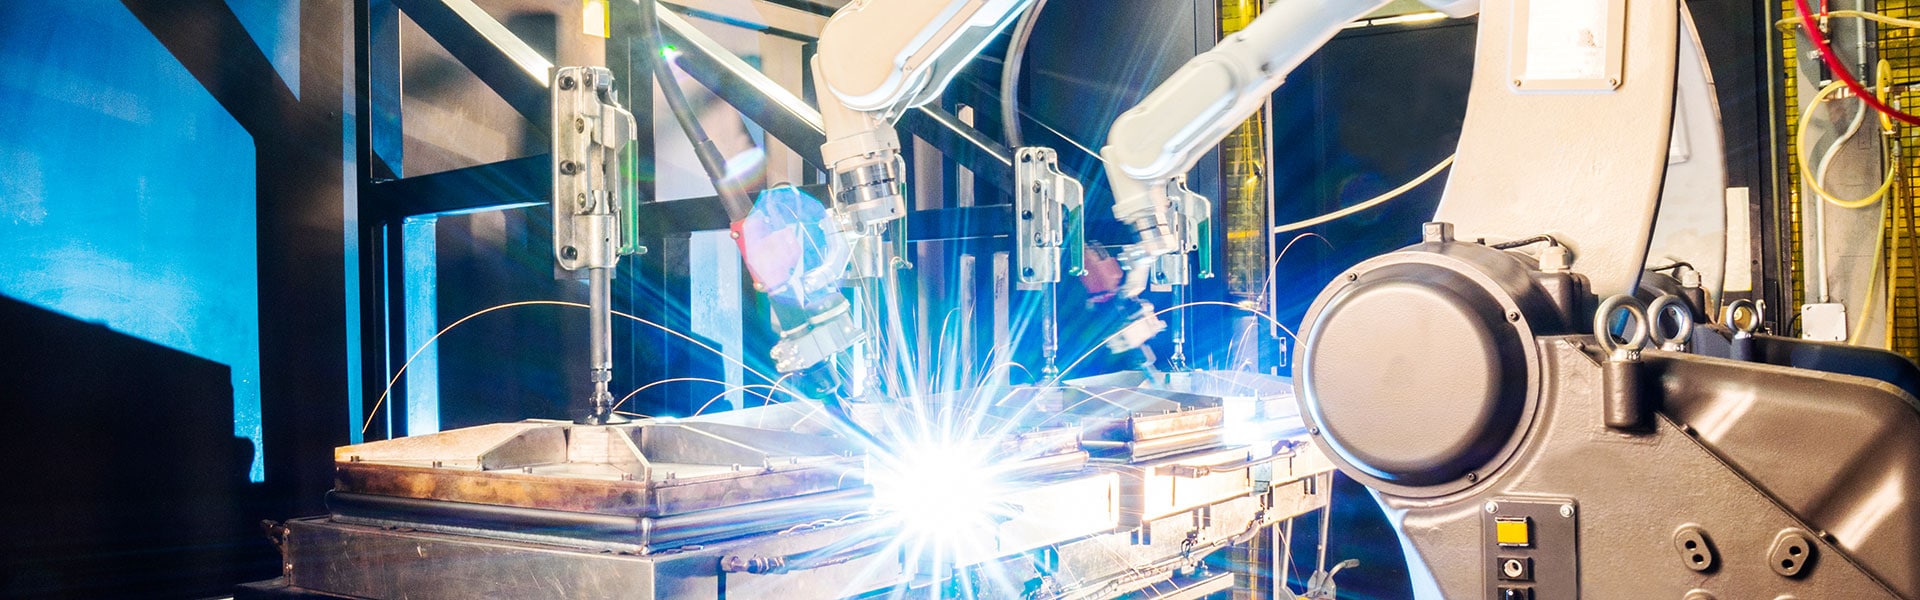 SAP S/4HANA Cloud Adds Exciting New Capabilities to Manufacturing and Professional Services Industries